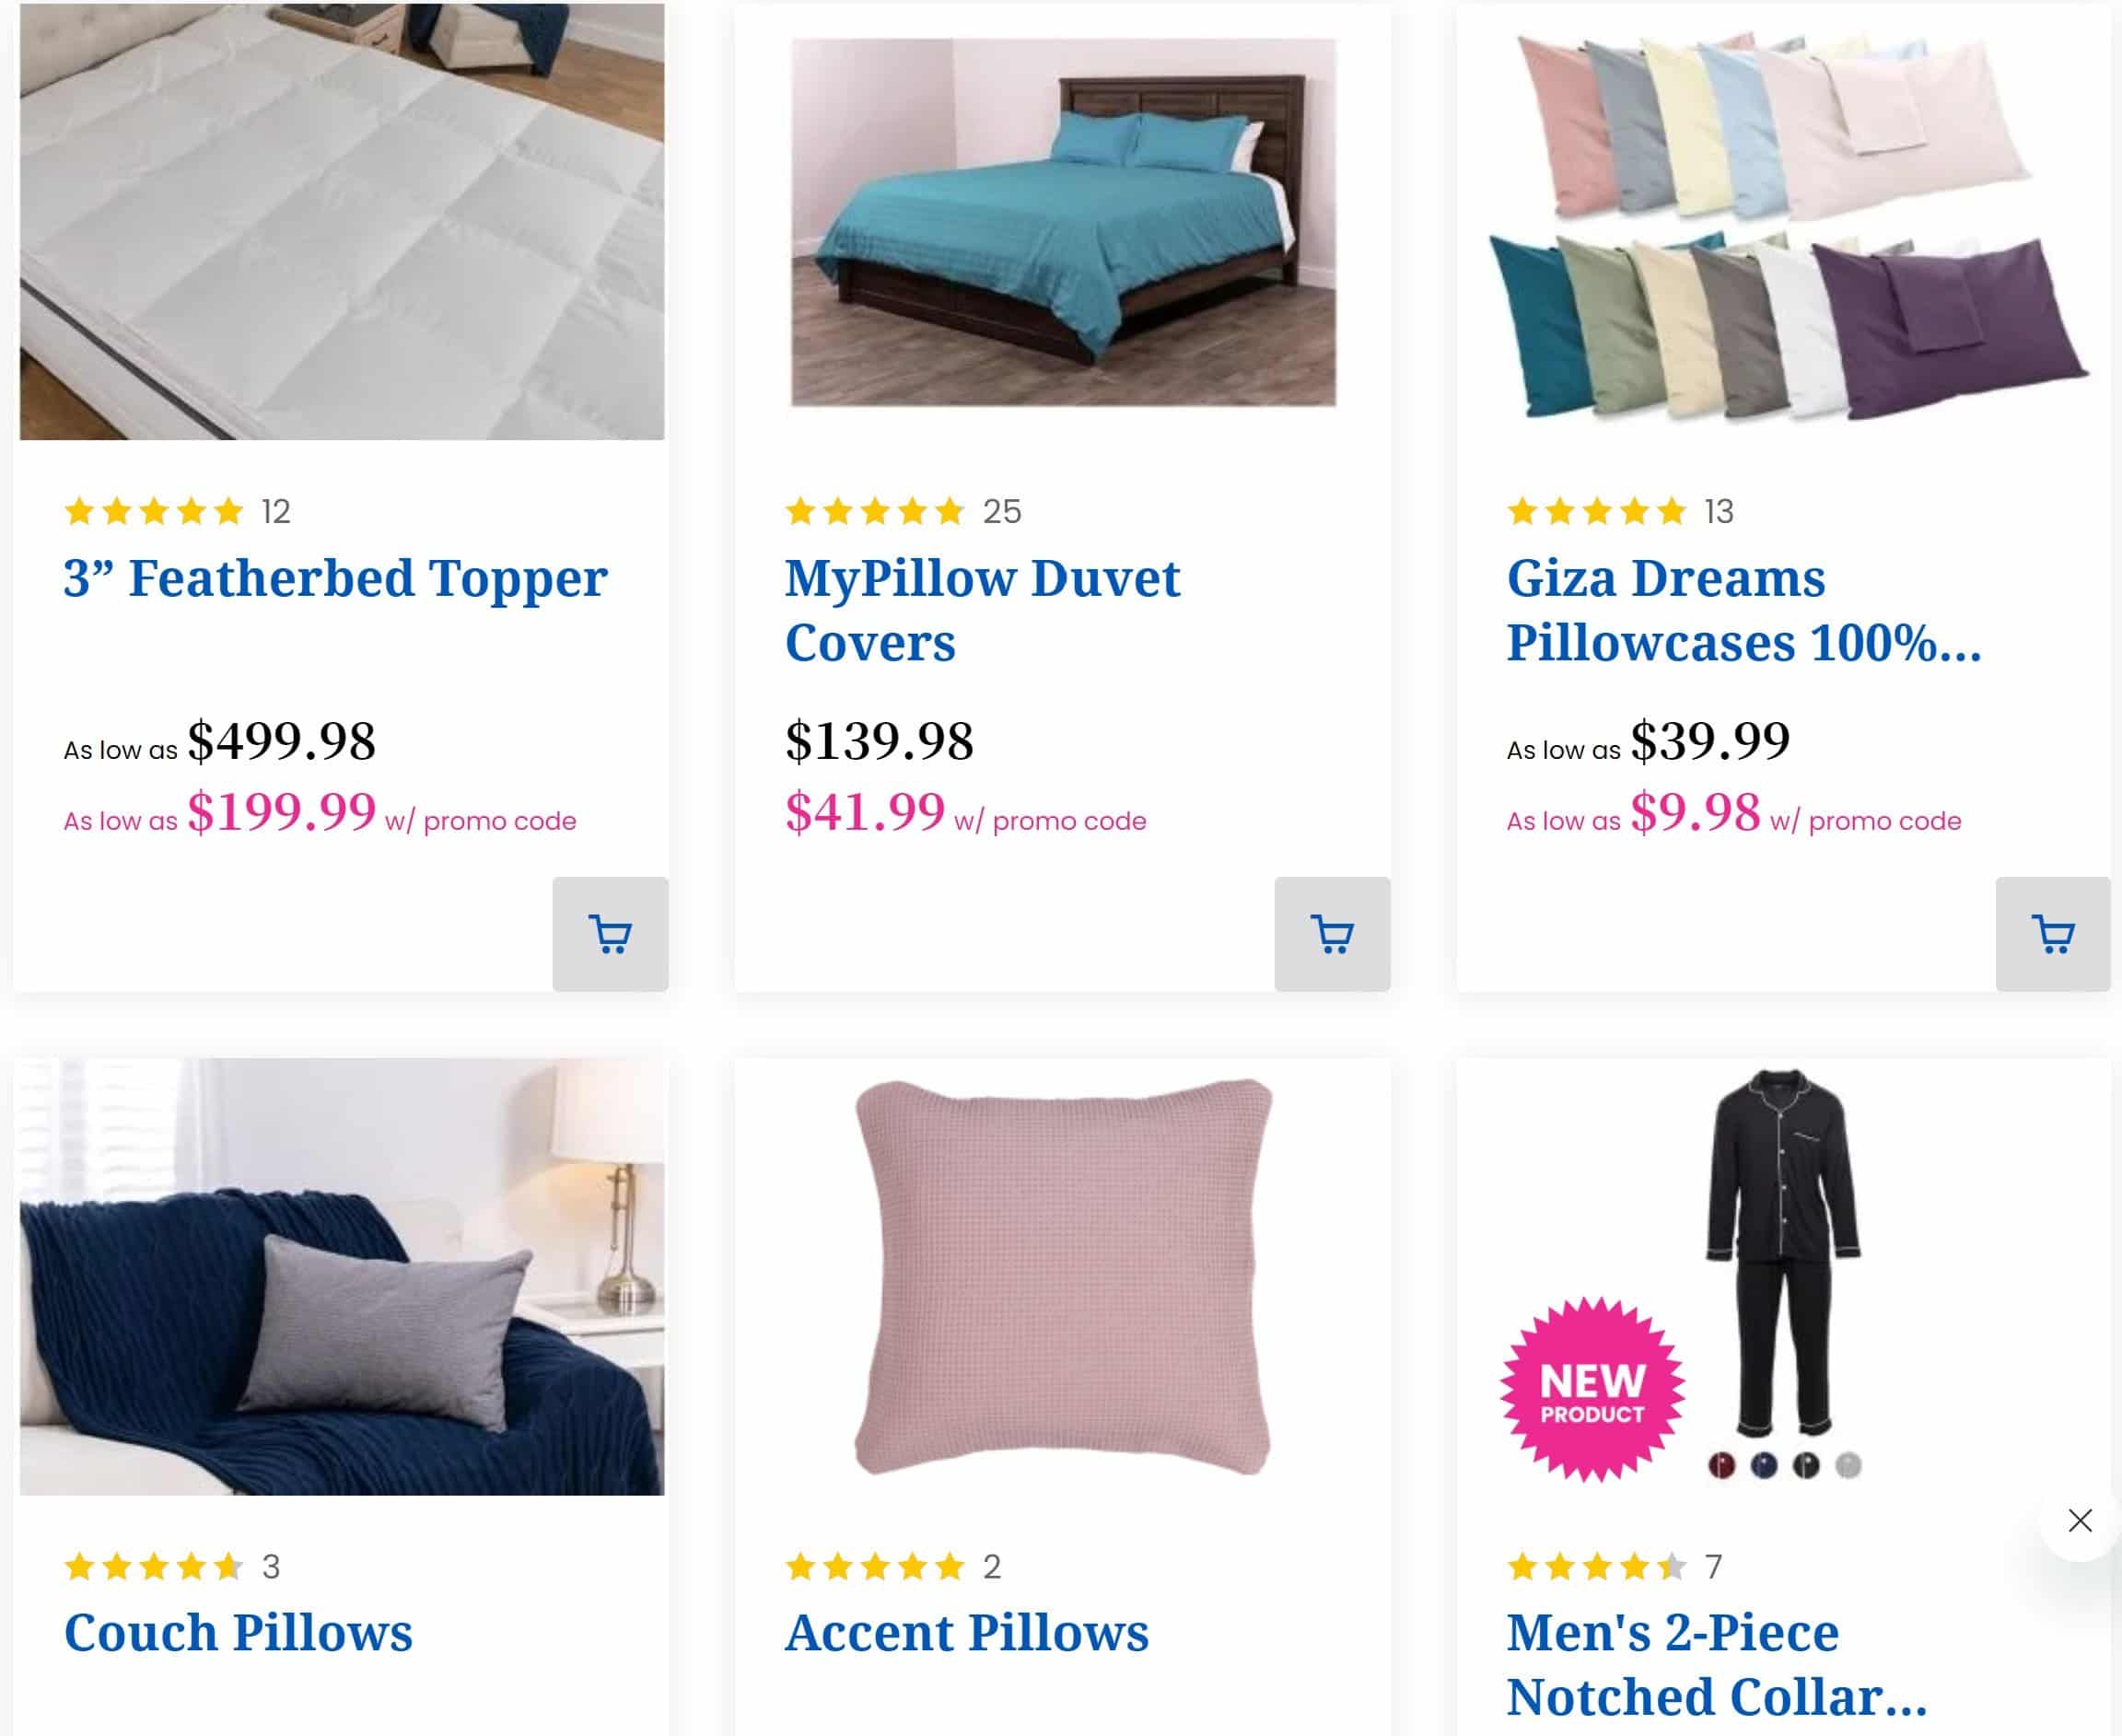 Thirty-Four Discounted Items At MyPillow’s “Closeout And Overstock Sale” (Including The 3″ Featherbed Topper)